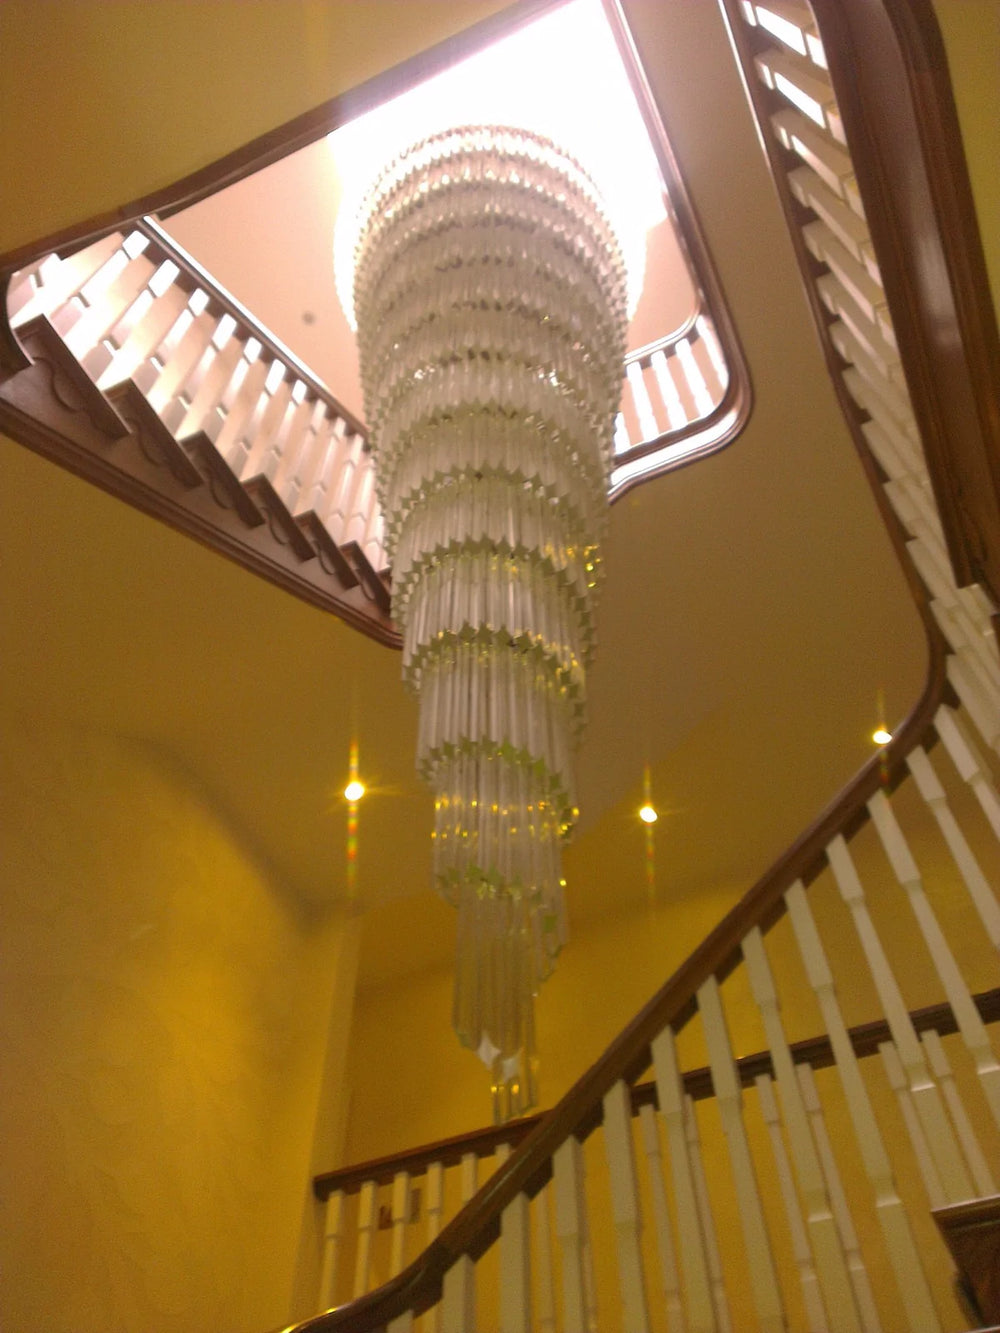 Trio Of Quadriedri Glass Prism Stairwell Spiral Chandeliers & More Bespoke Size Options